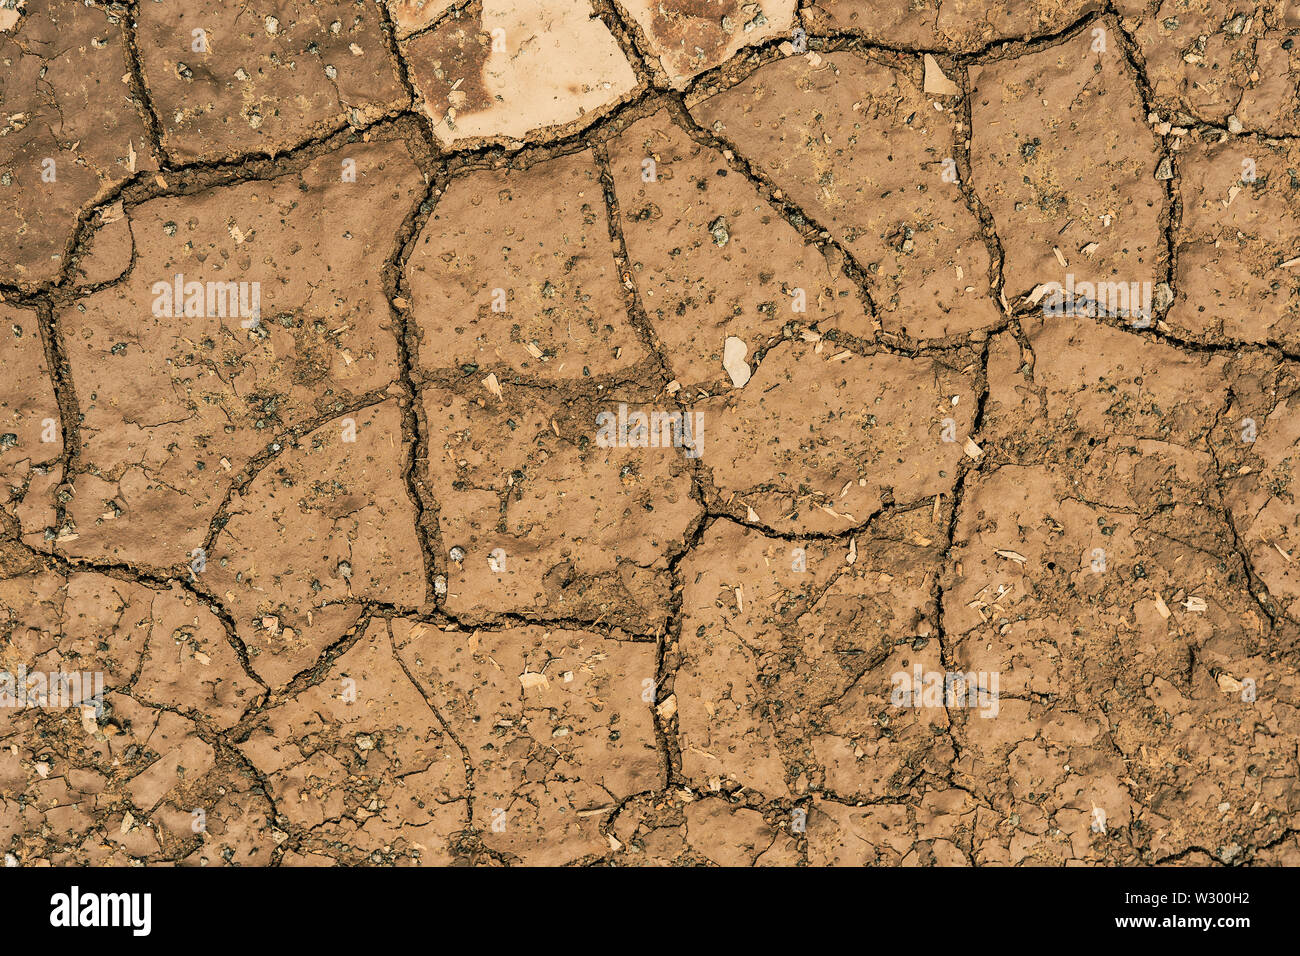 Cracked Dry Clay Ground Soil Background and Texture Stock Photo